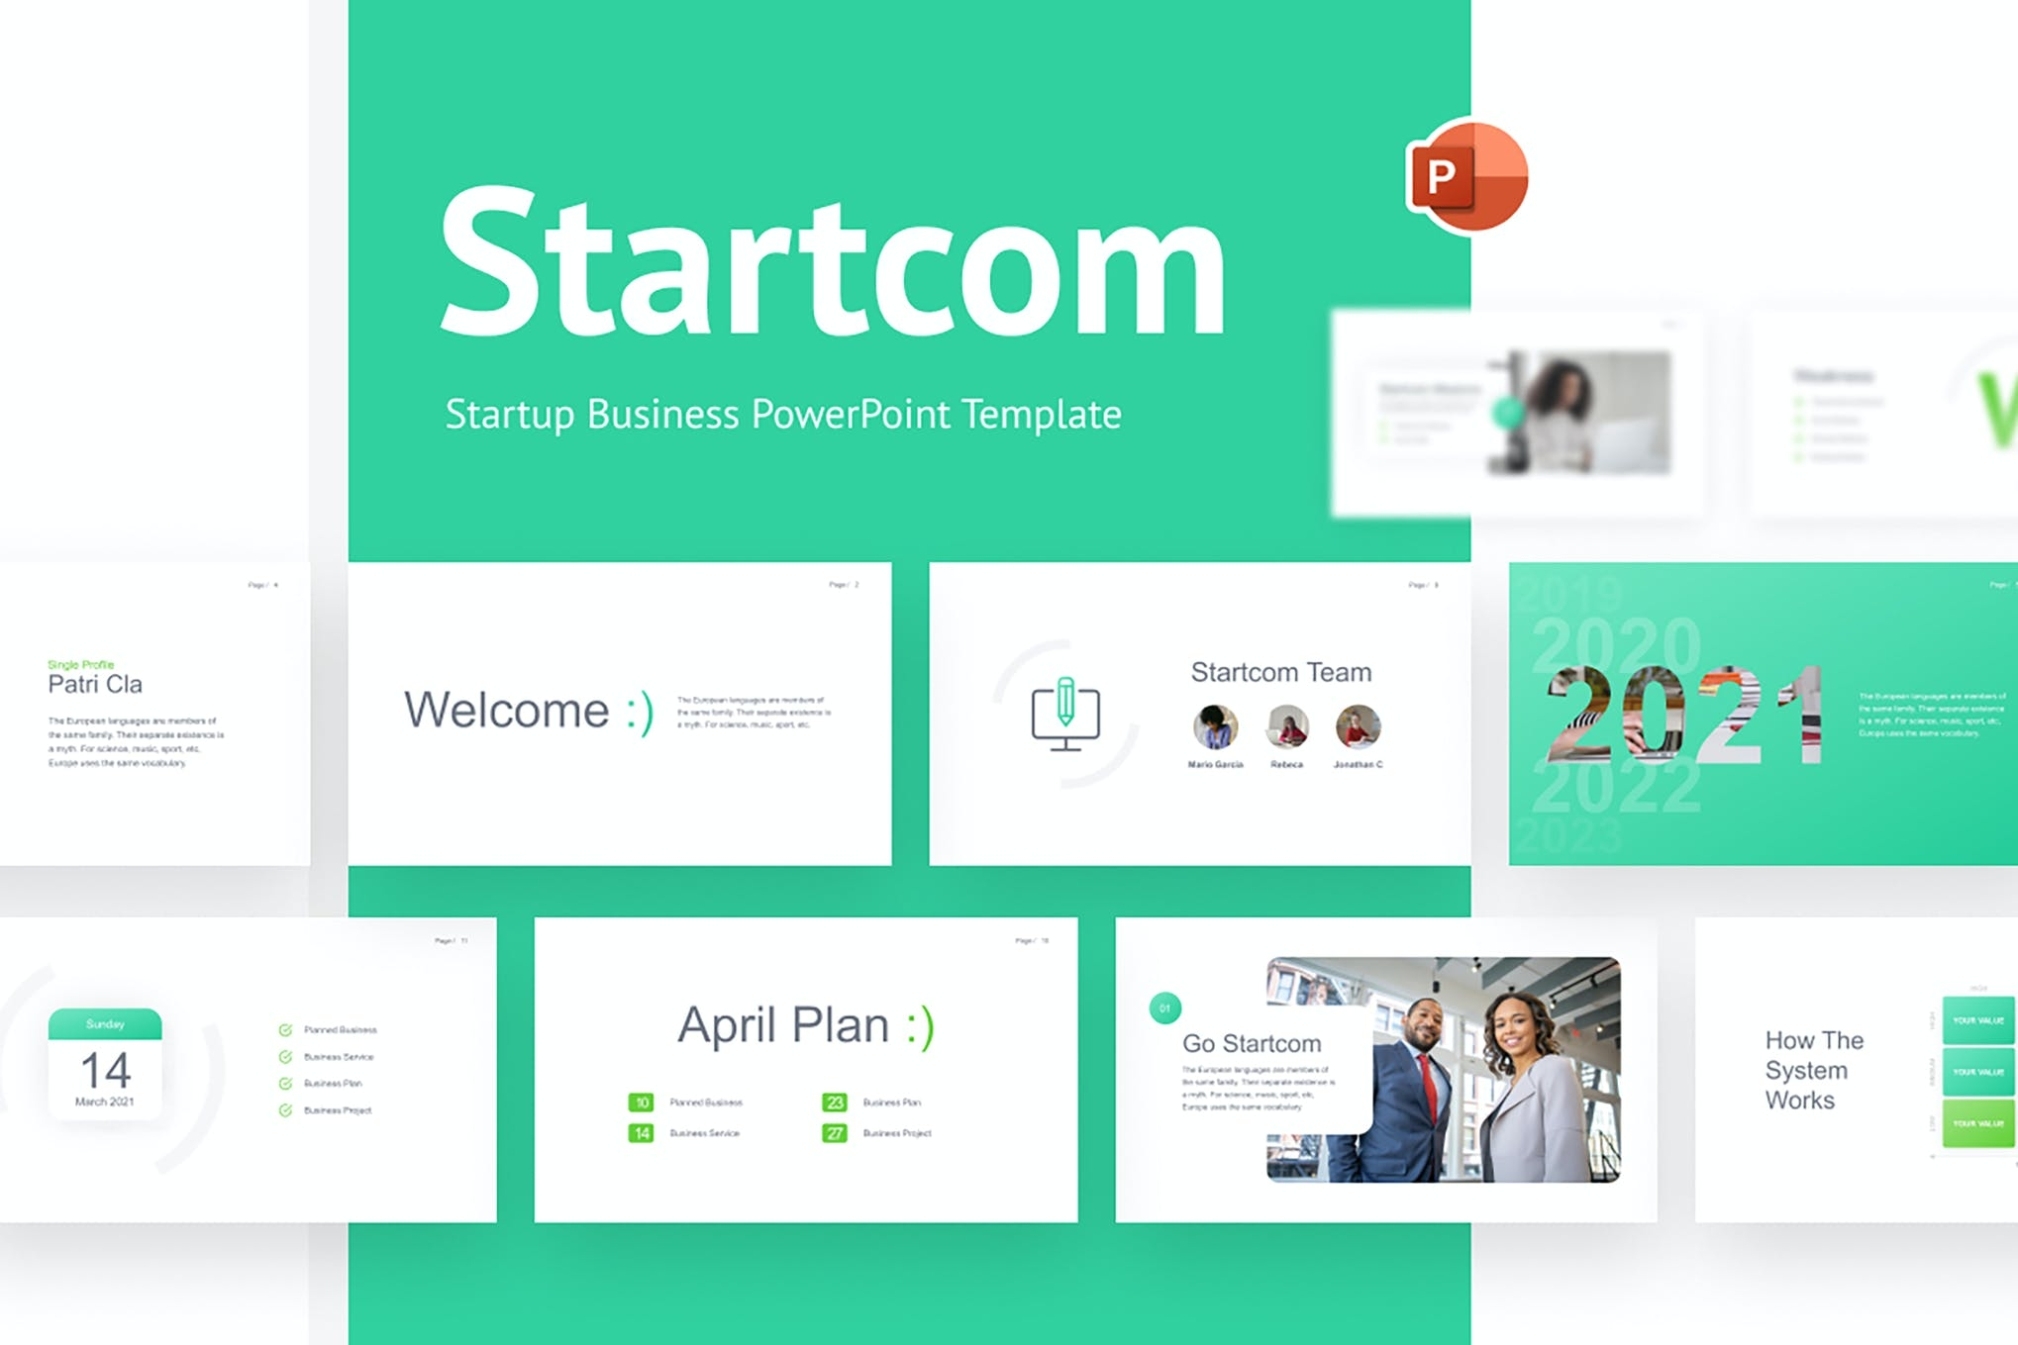 45+ Best Free Powerpoint Pitch Deck Templates For Startups (Ppt) - Theme Junkie for Powerpoint Pitch Book Template